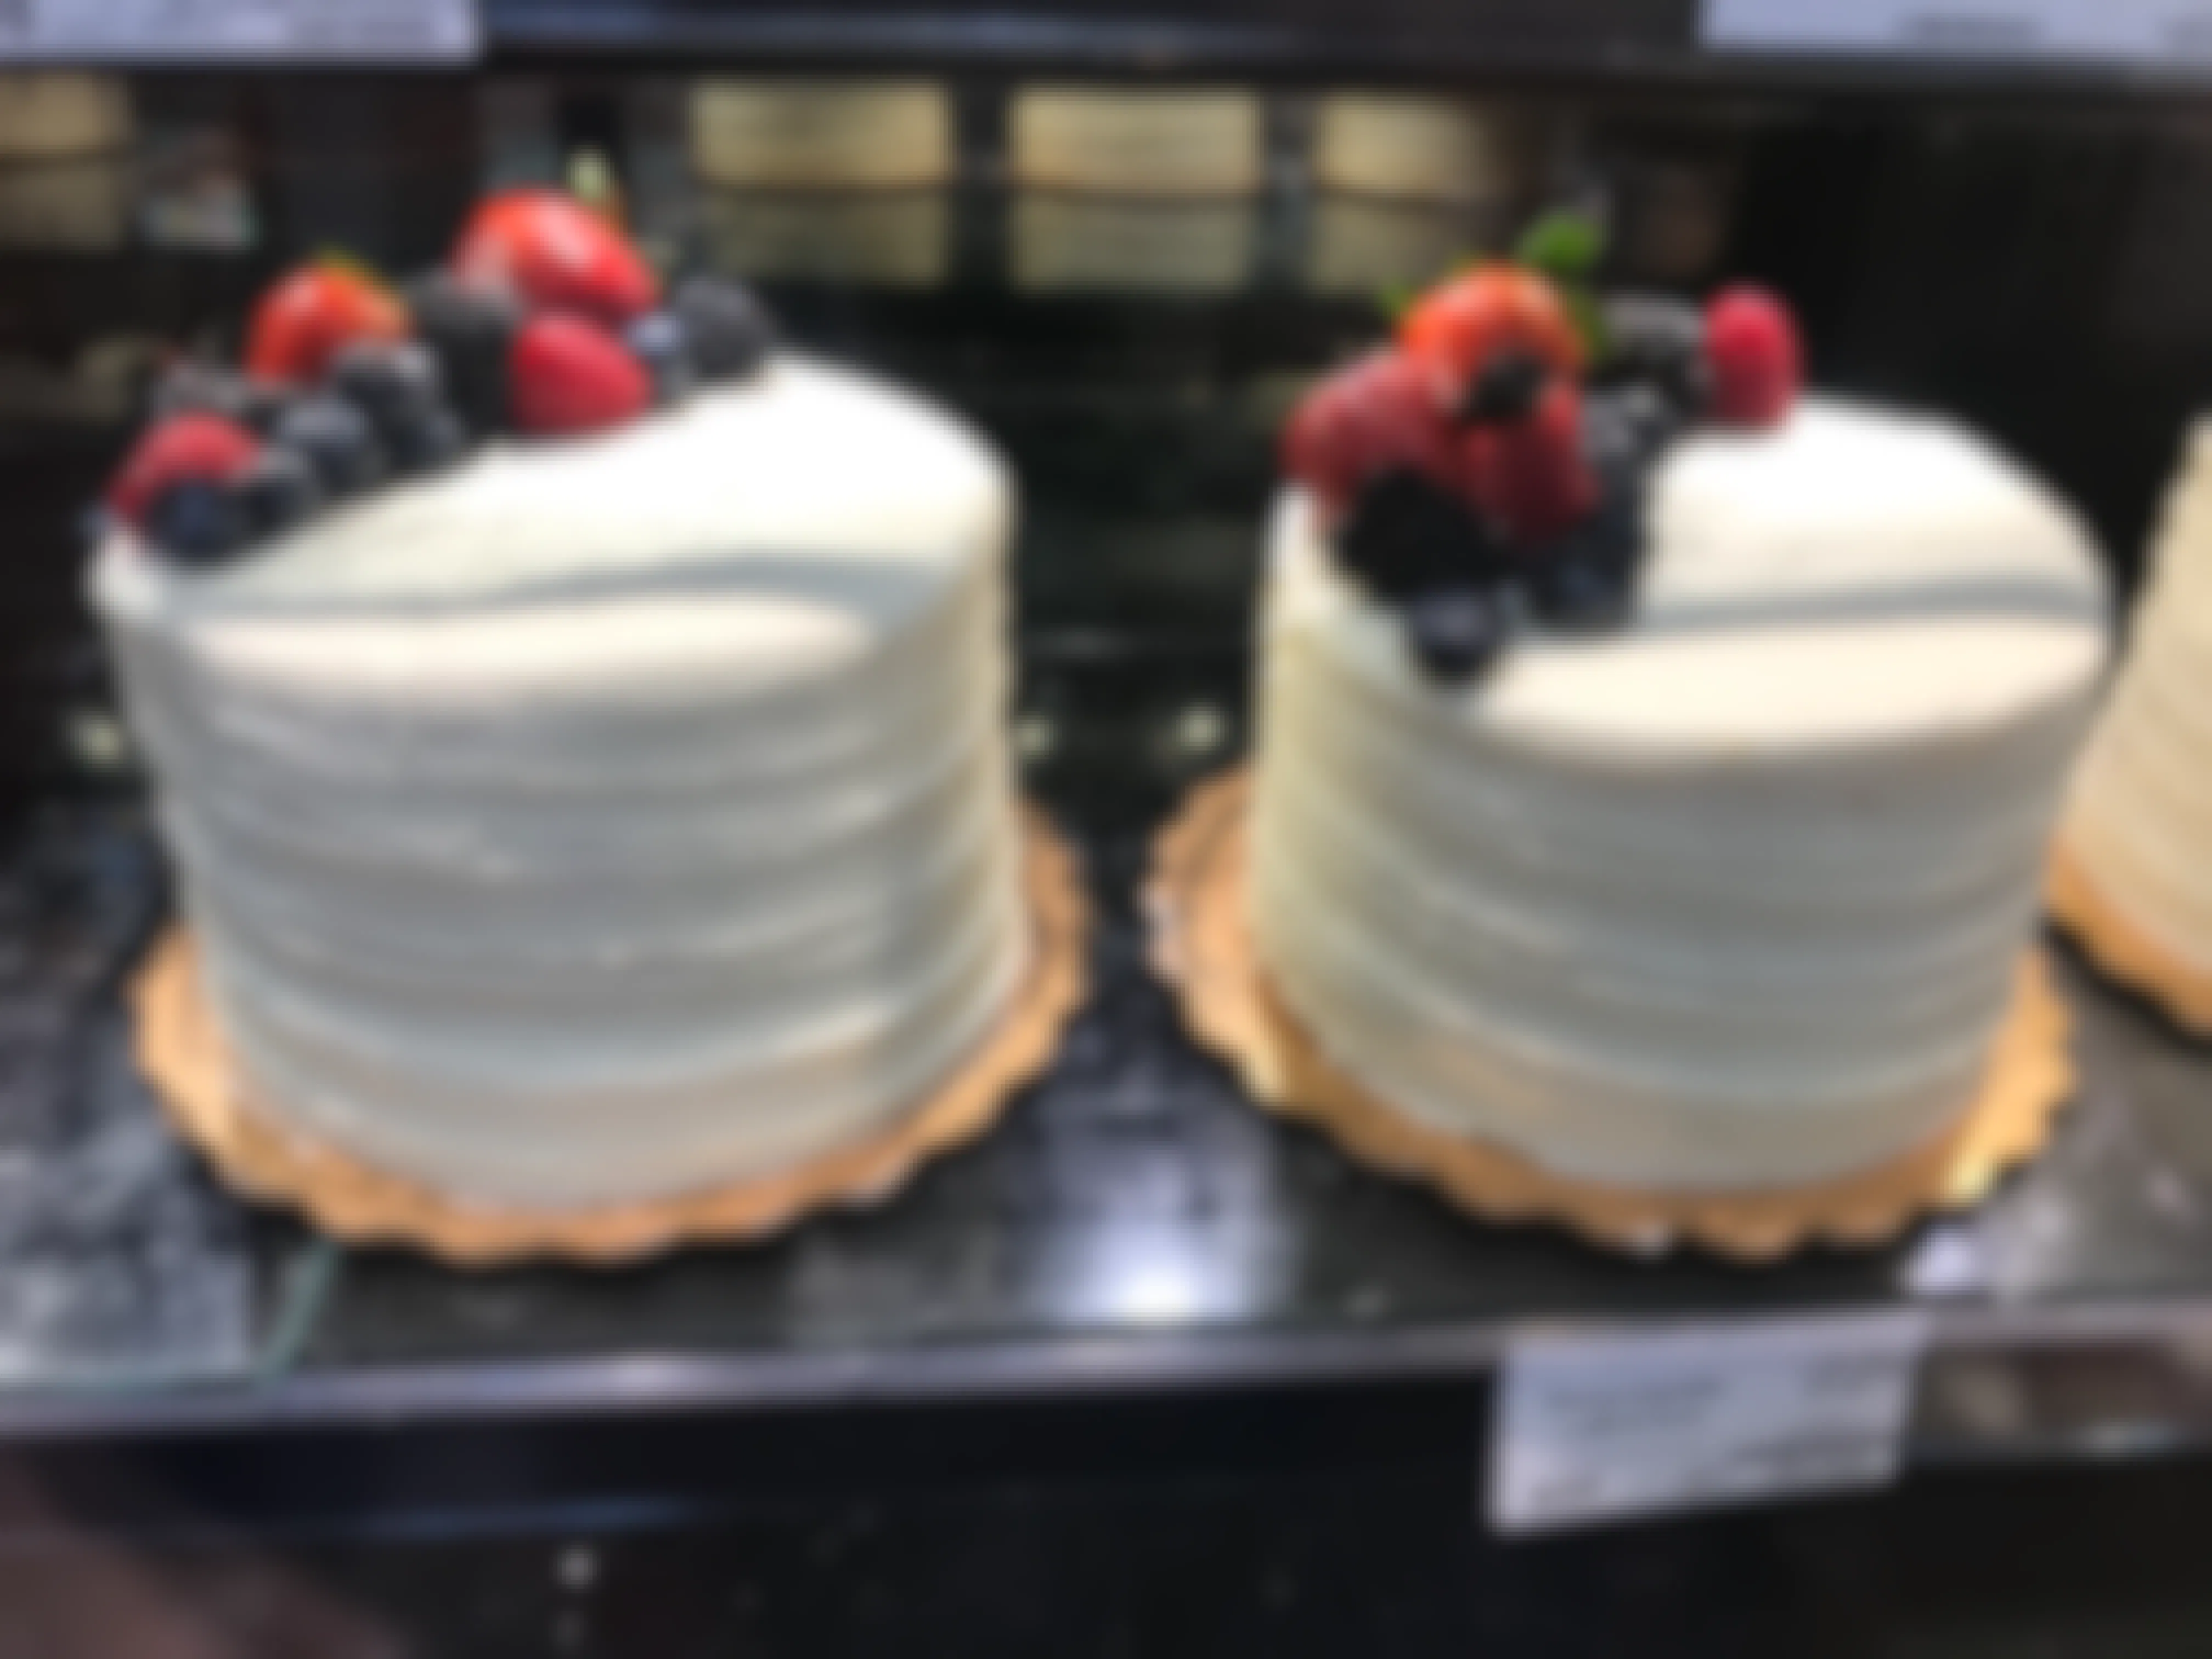 Chantily Cake at Whole Foods